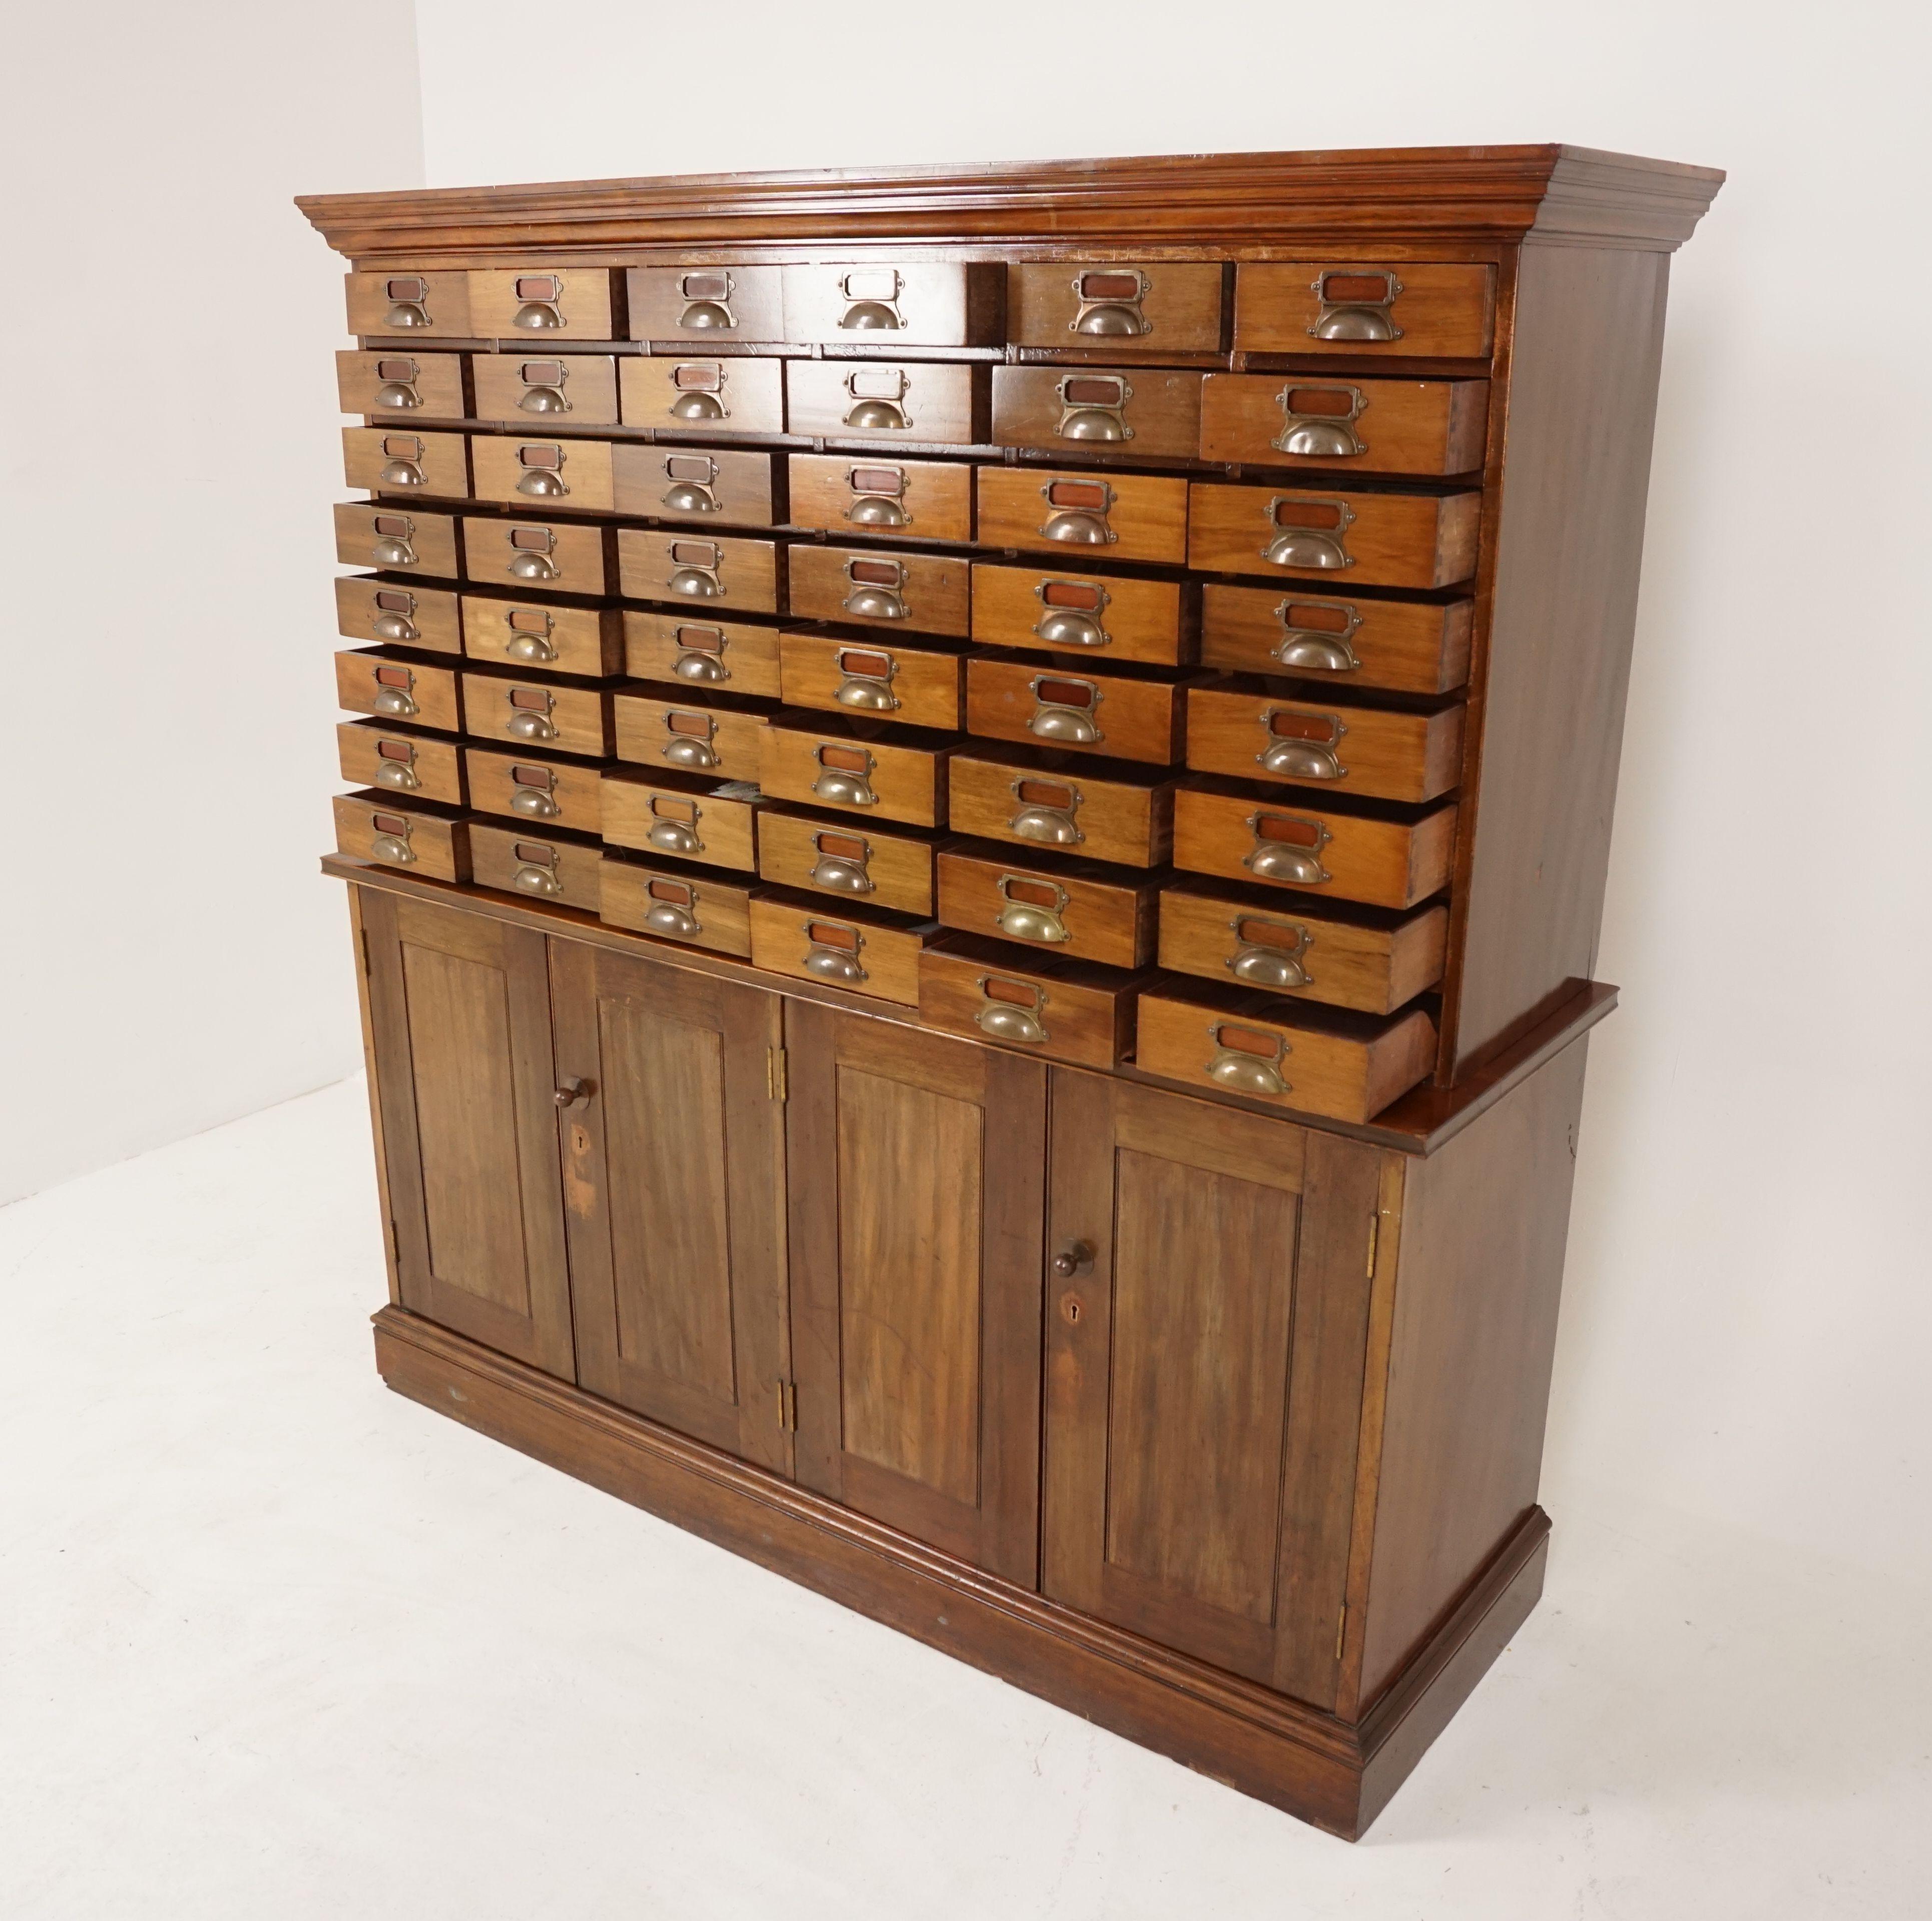 Vintage Walnut 48 drawer file cabinet, cupboard, Scotland 1920, H204

Scotland, 1920
Solid Walnut
Original finish
Moulded top with large flared out cornice
48 pull out dovetailed file drawers
With original brass pulls and index file card holders
The